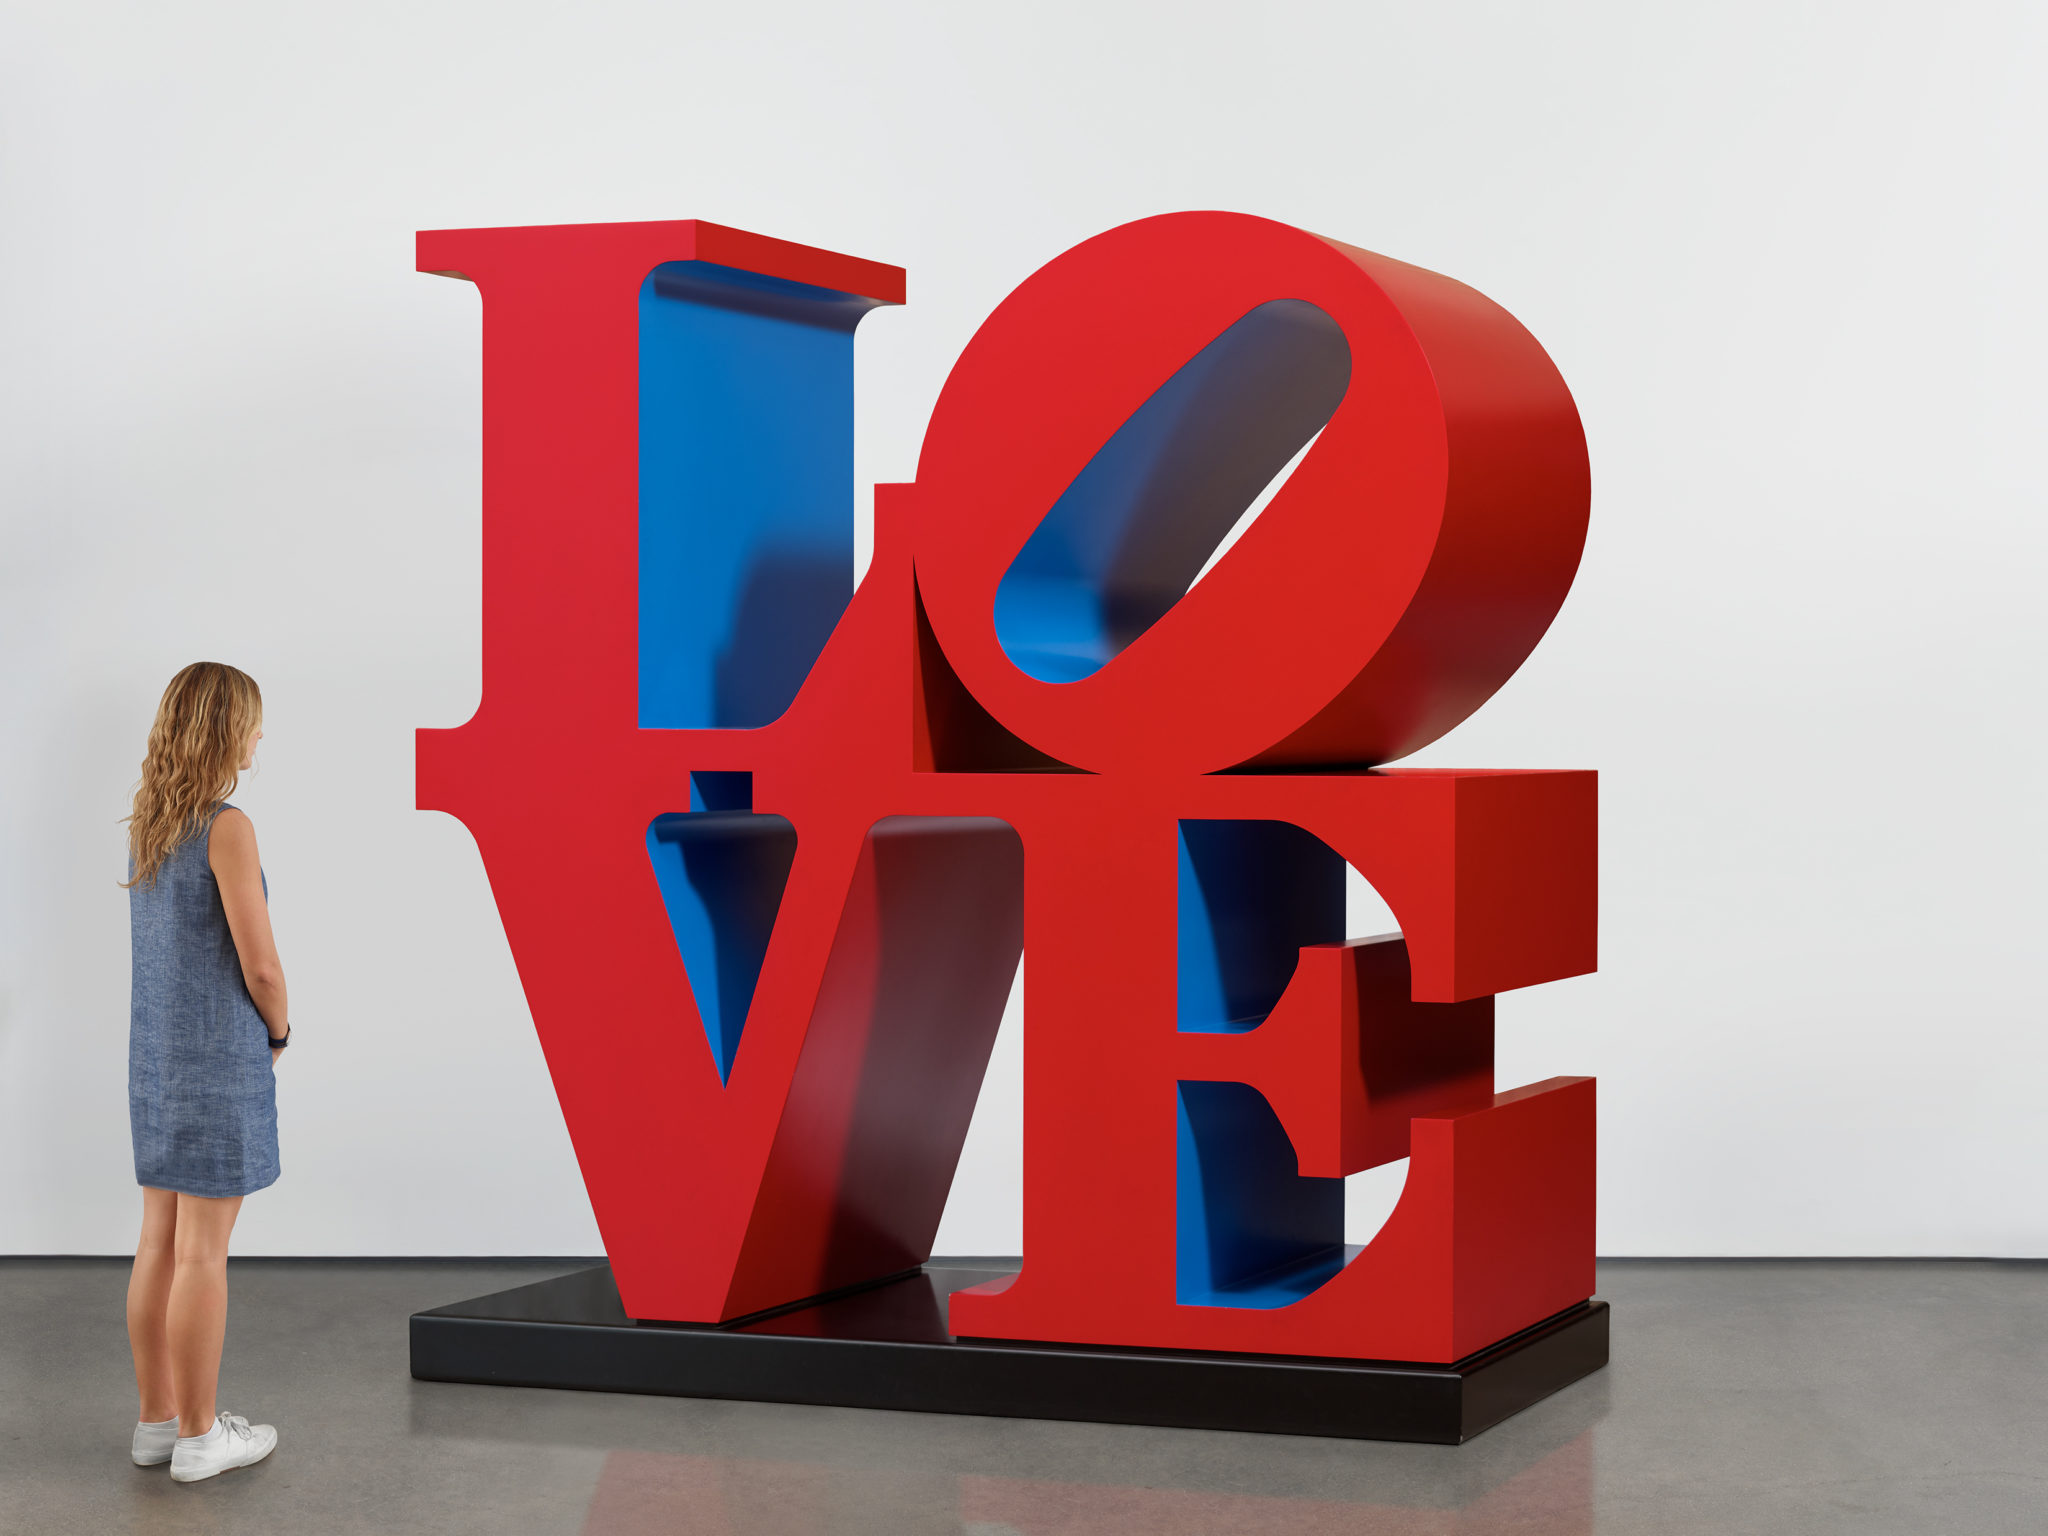 Scale view of Robert Indiana's LOVE, 1966/99